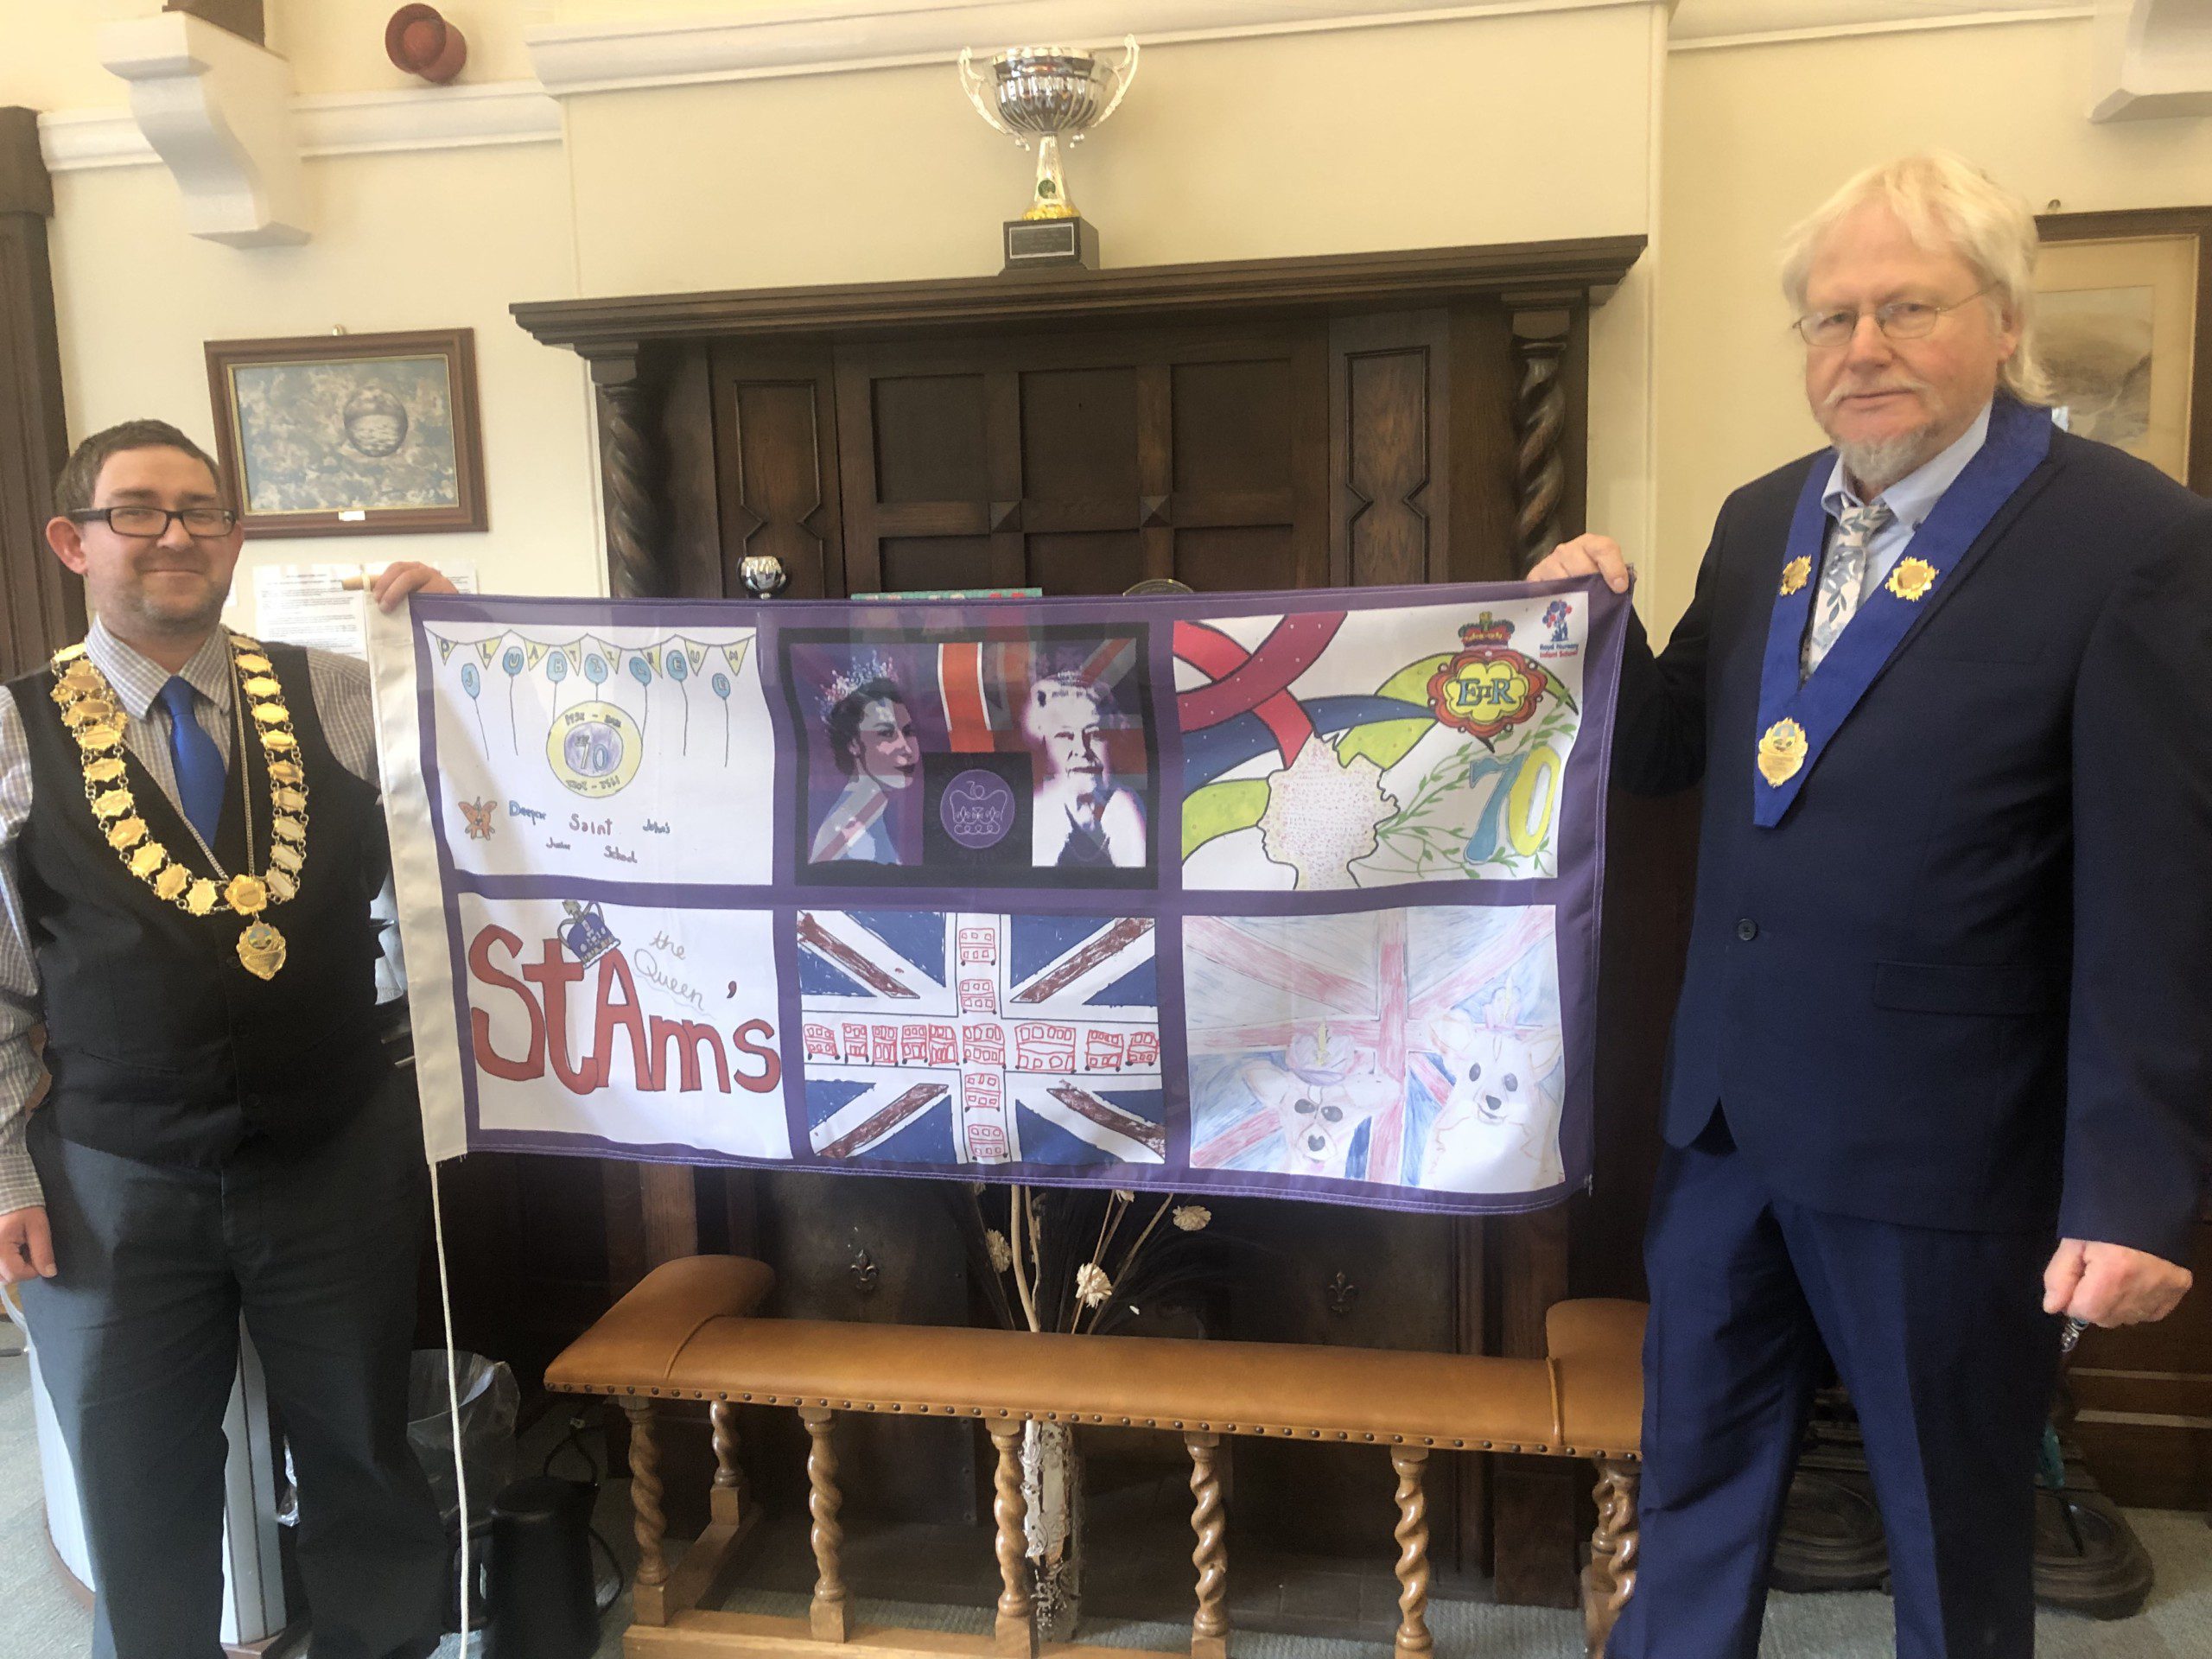 Stocksbridge Town Council Design a Jubilee Flag Competition May 2022